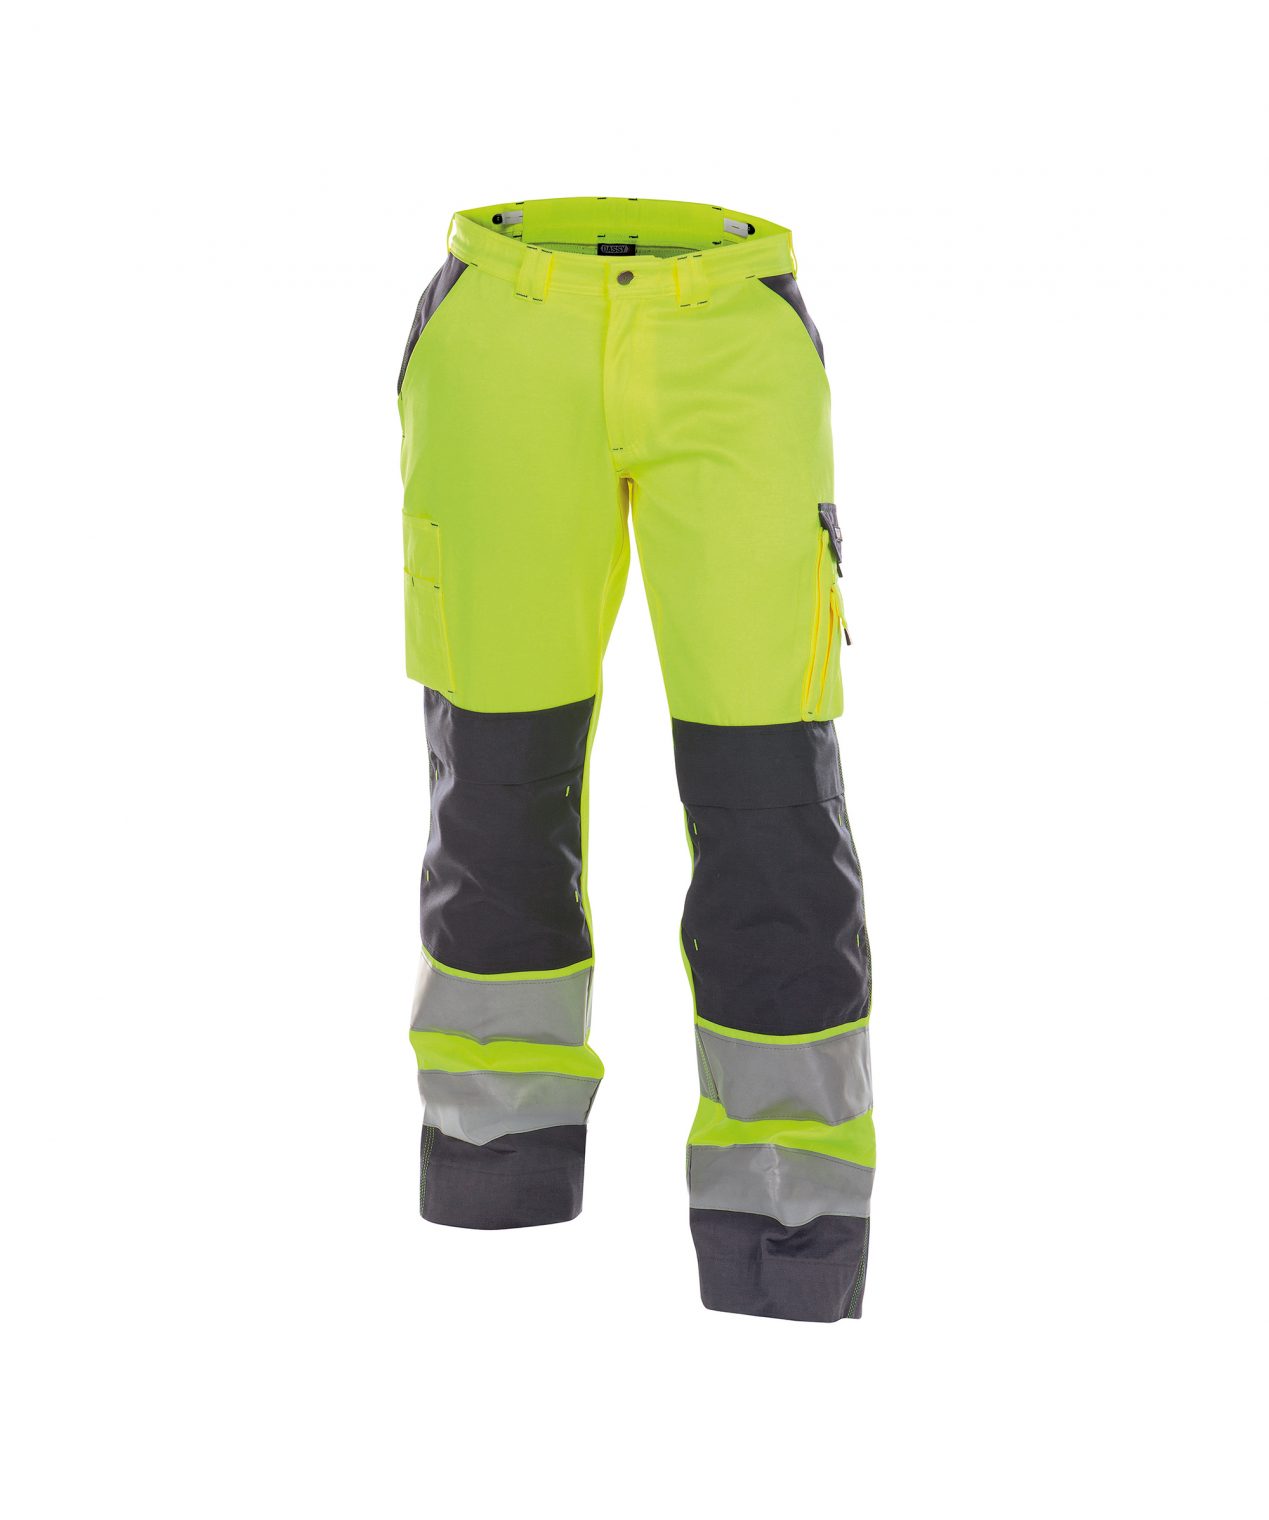 buffalo high visibility work trousers with knee pockets fluo yellow cement grey front